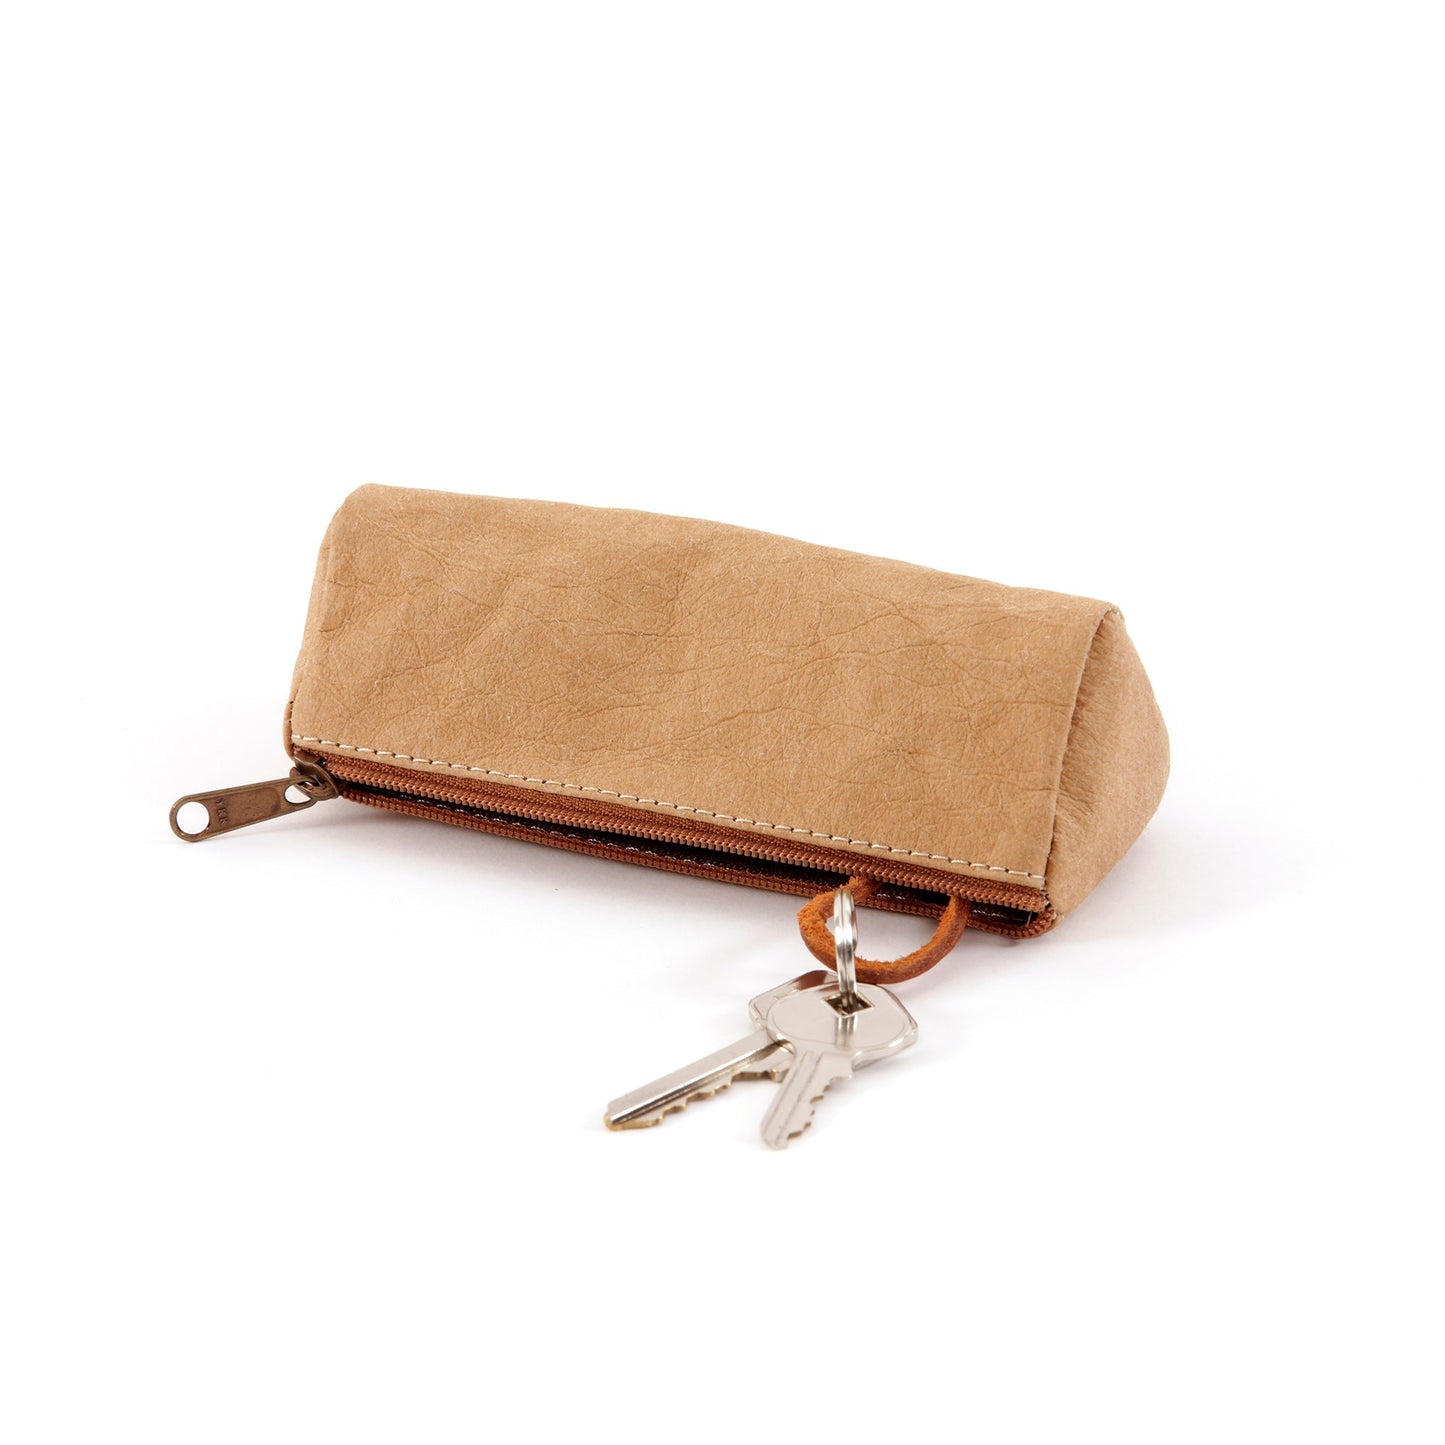 A tan washable paper key holder is shown on its side, unzipped with two keys attached to the inner ring.